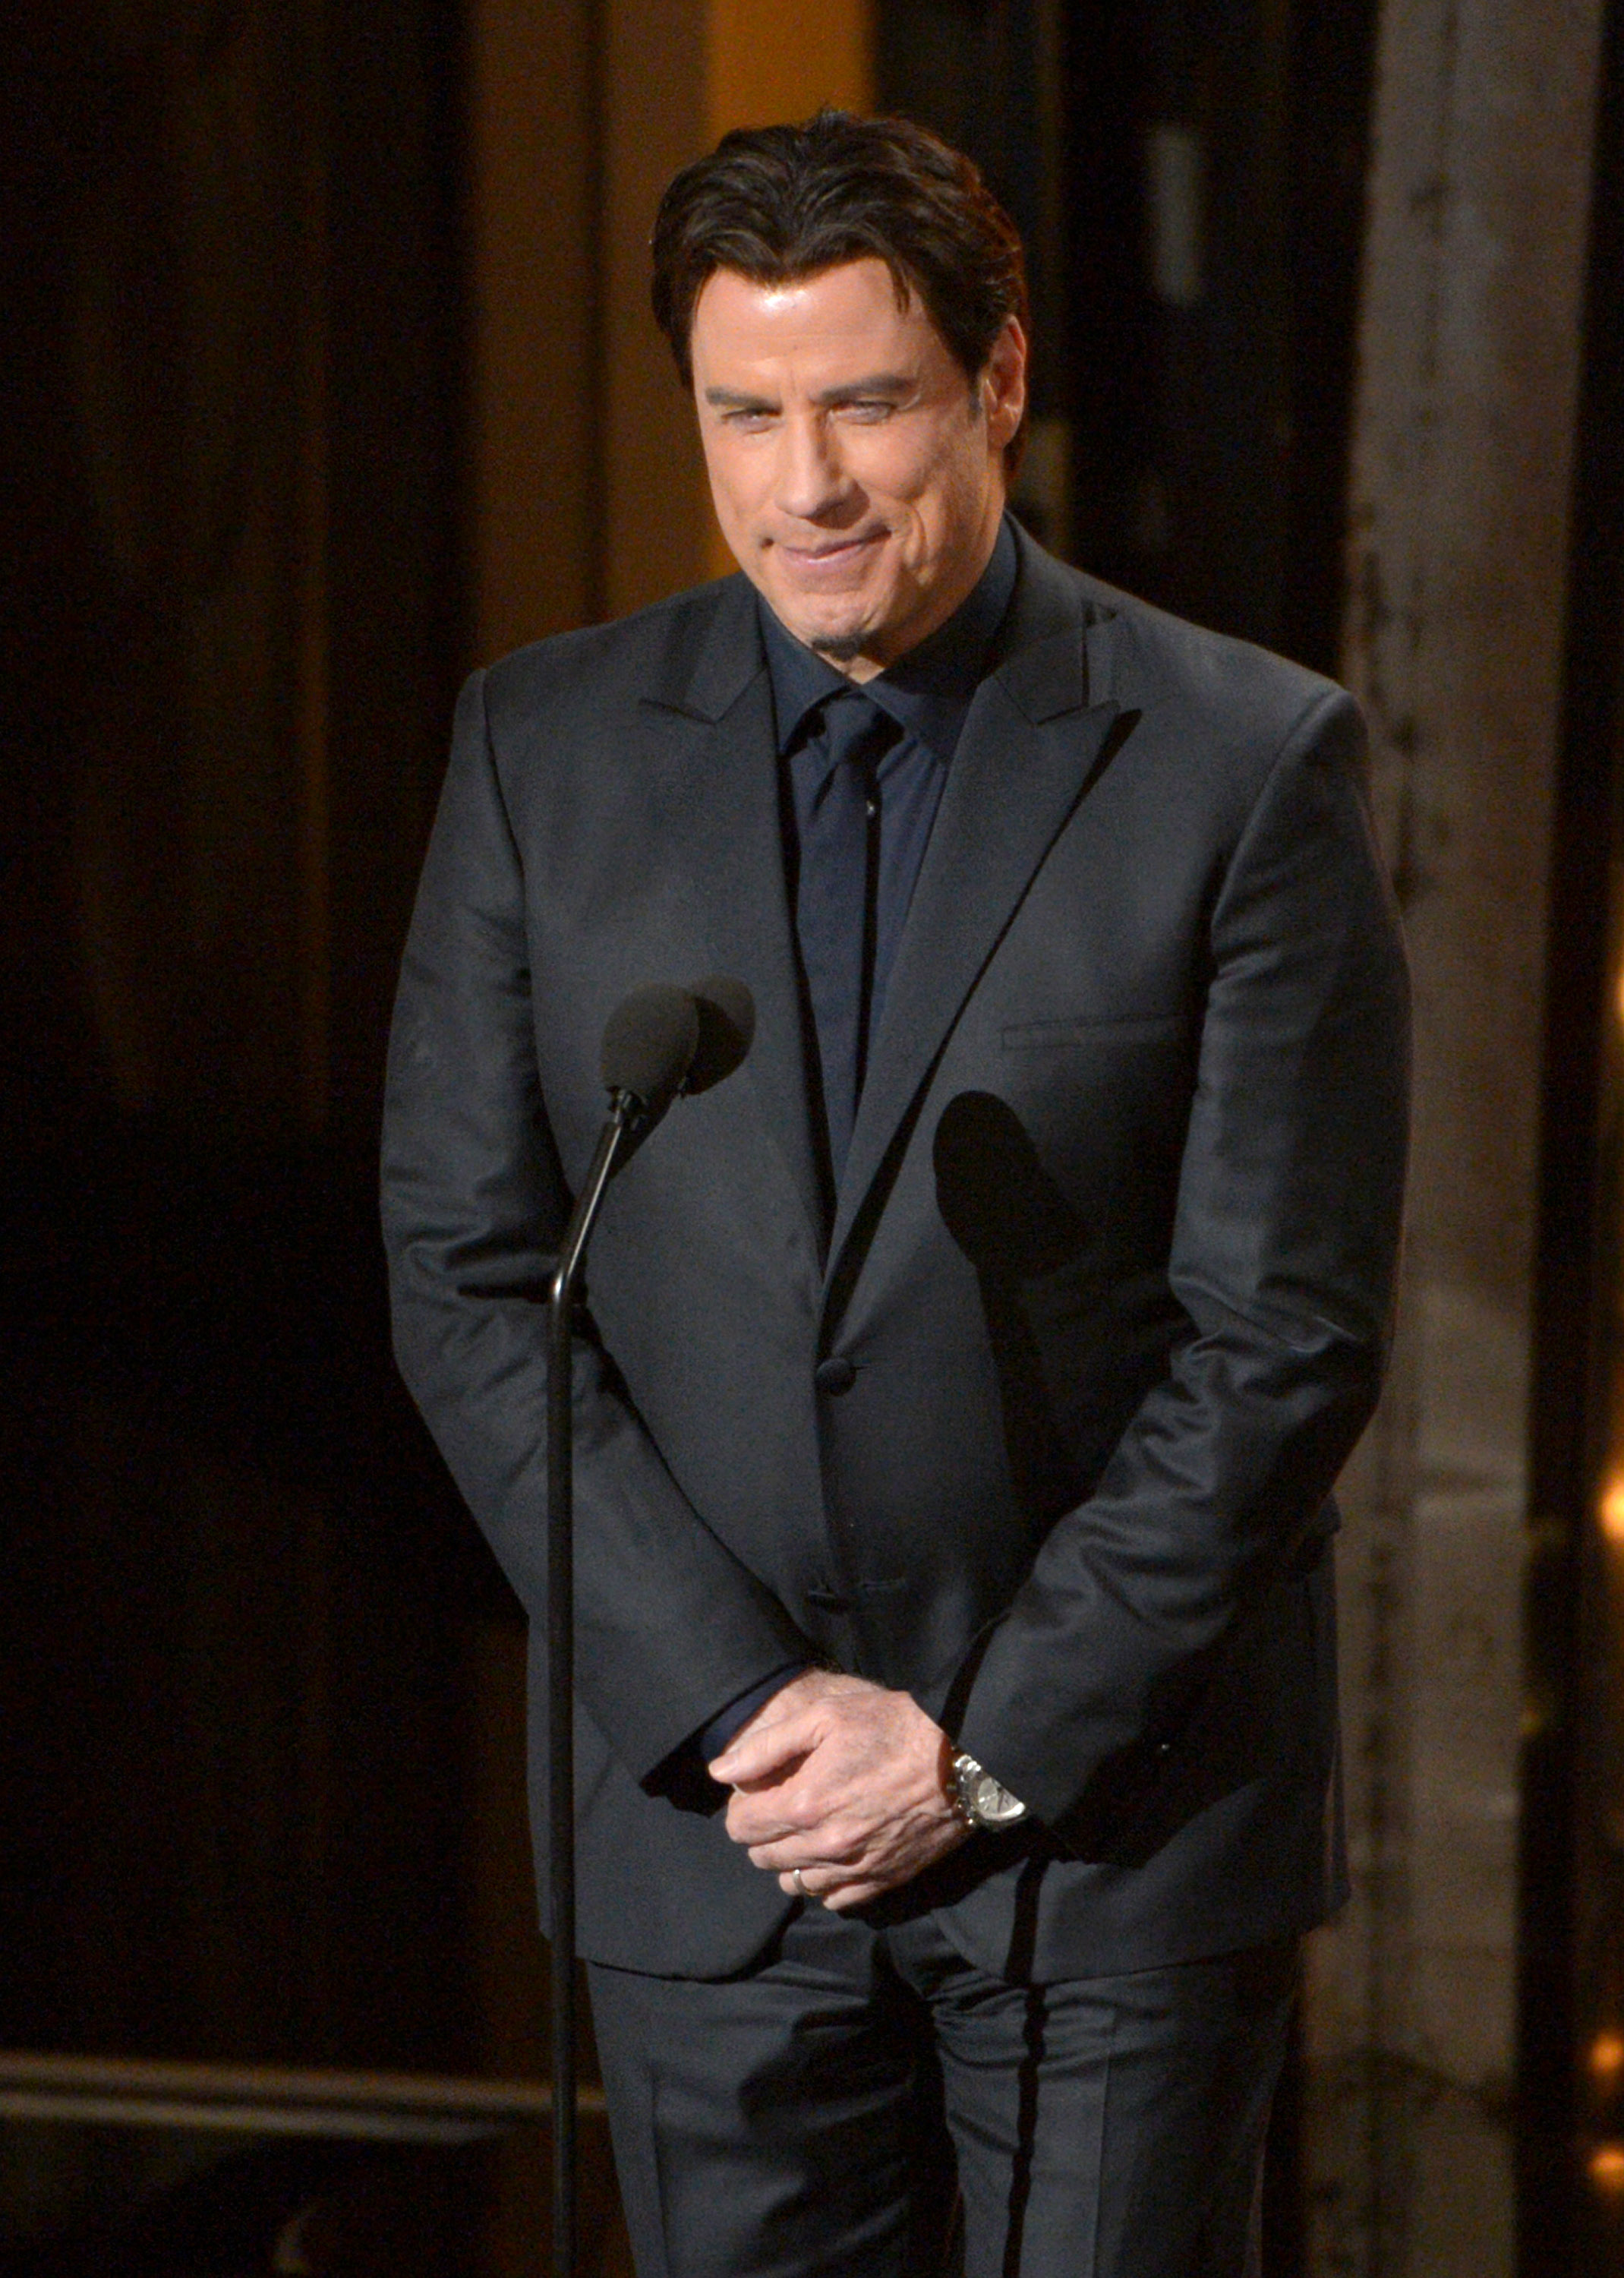 Presenter John Travolta speaks during the Oscars at the Dolby Theatre on Sunday, March 2, 2014, in Los Angeles. (John Shearer—Invision/AP)